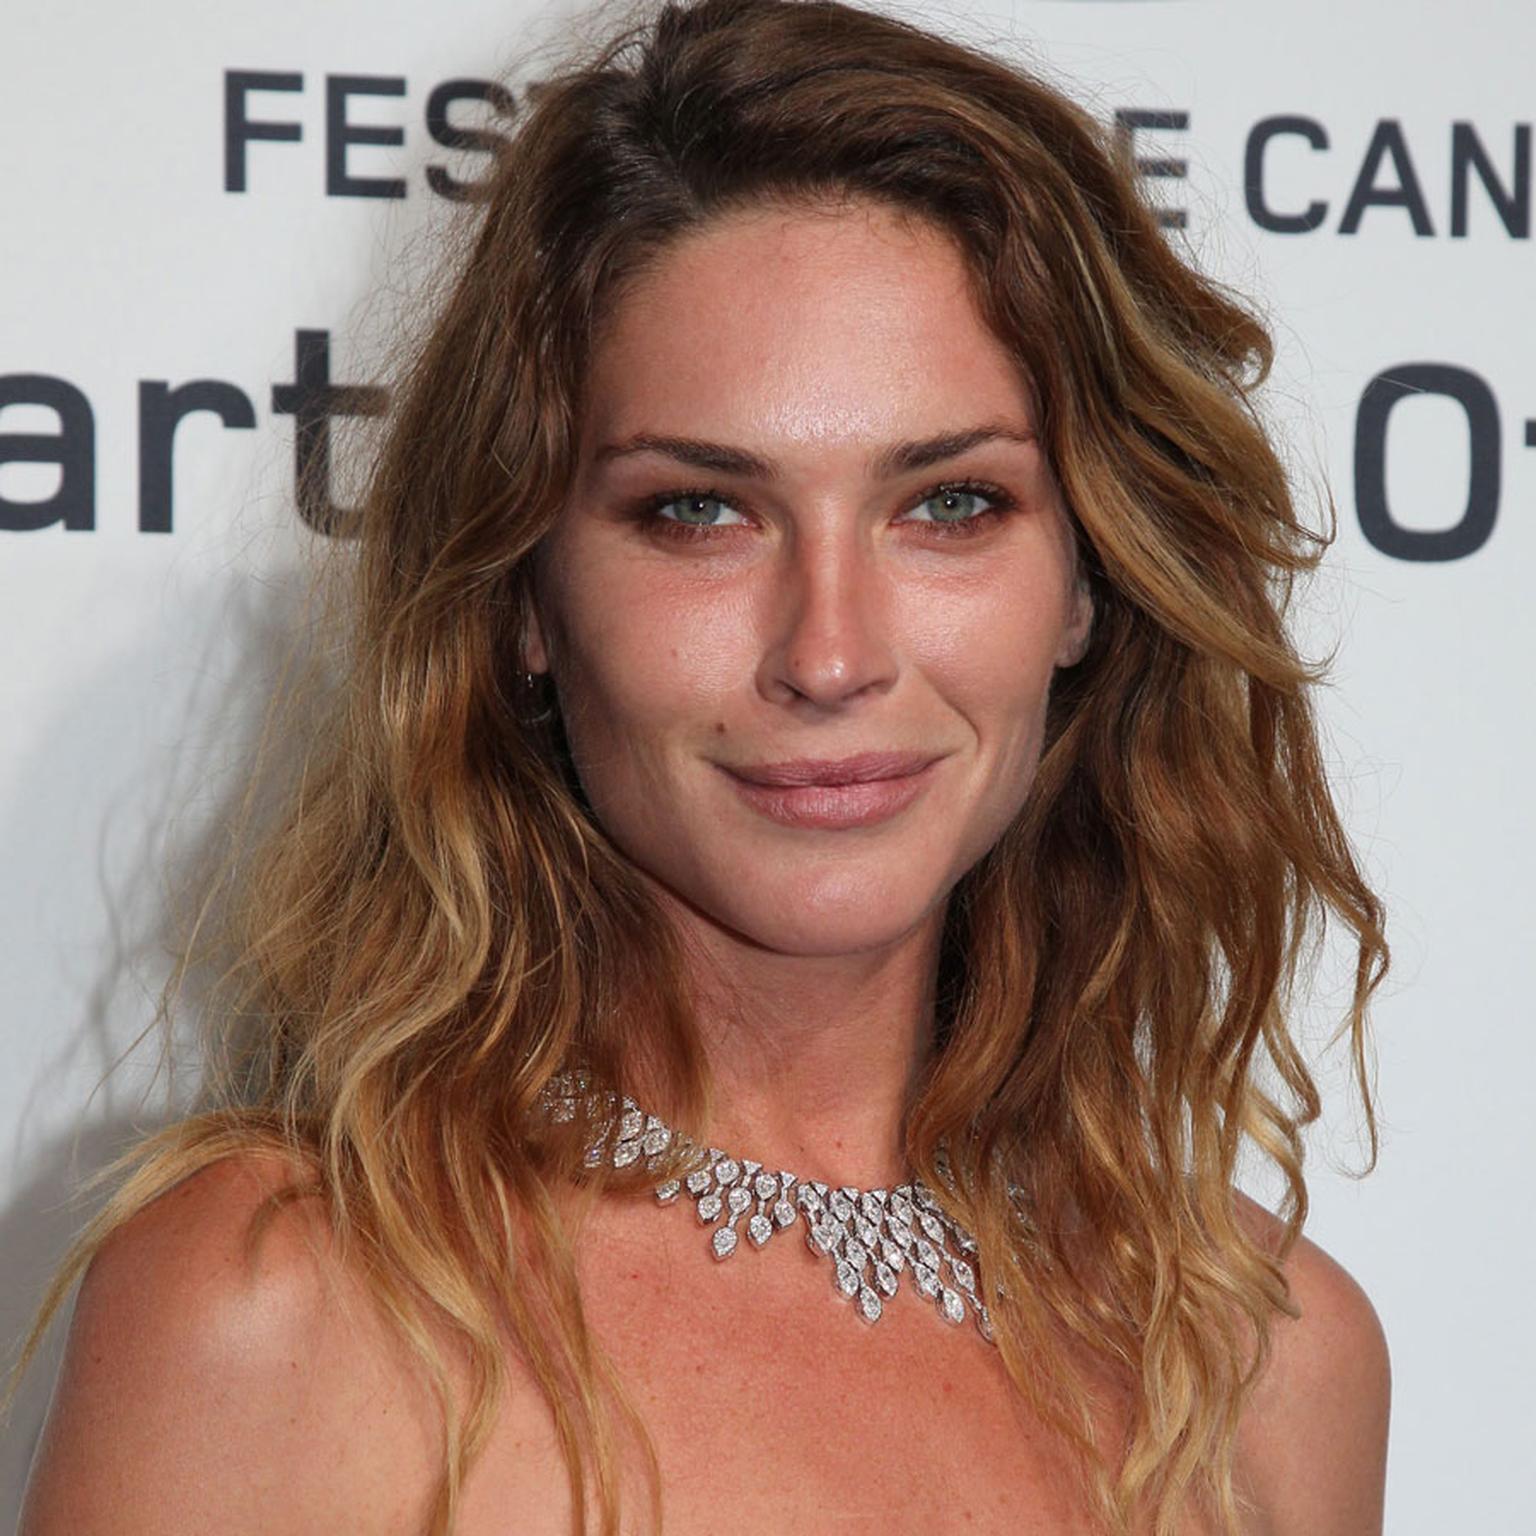 Erin Wasson chopard at cannes Main pic